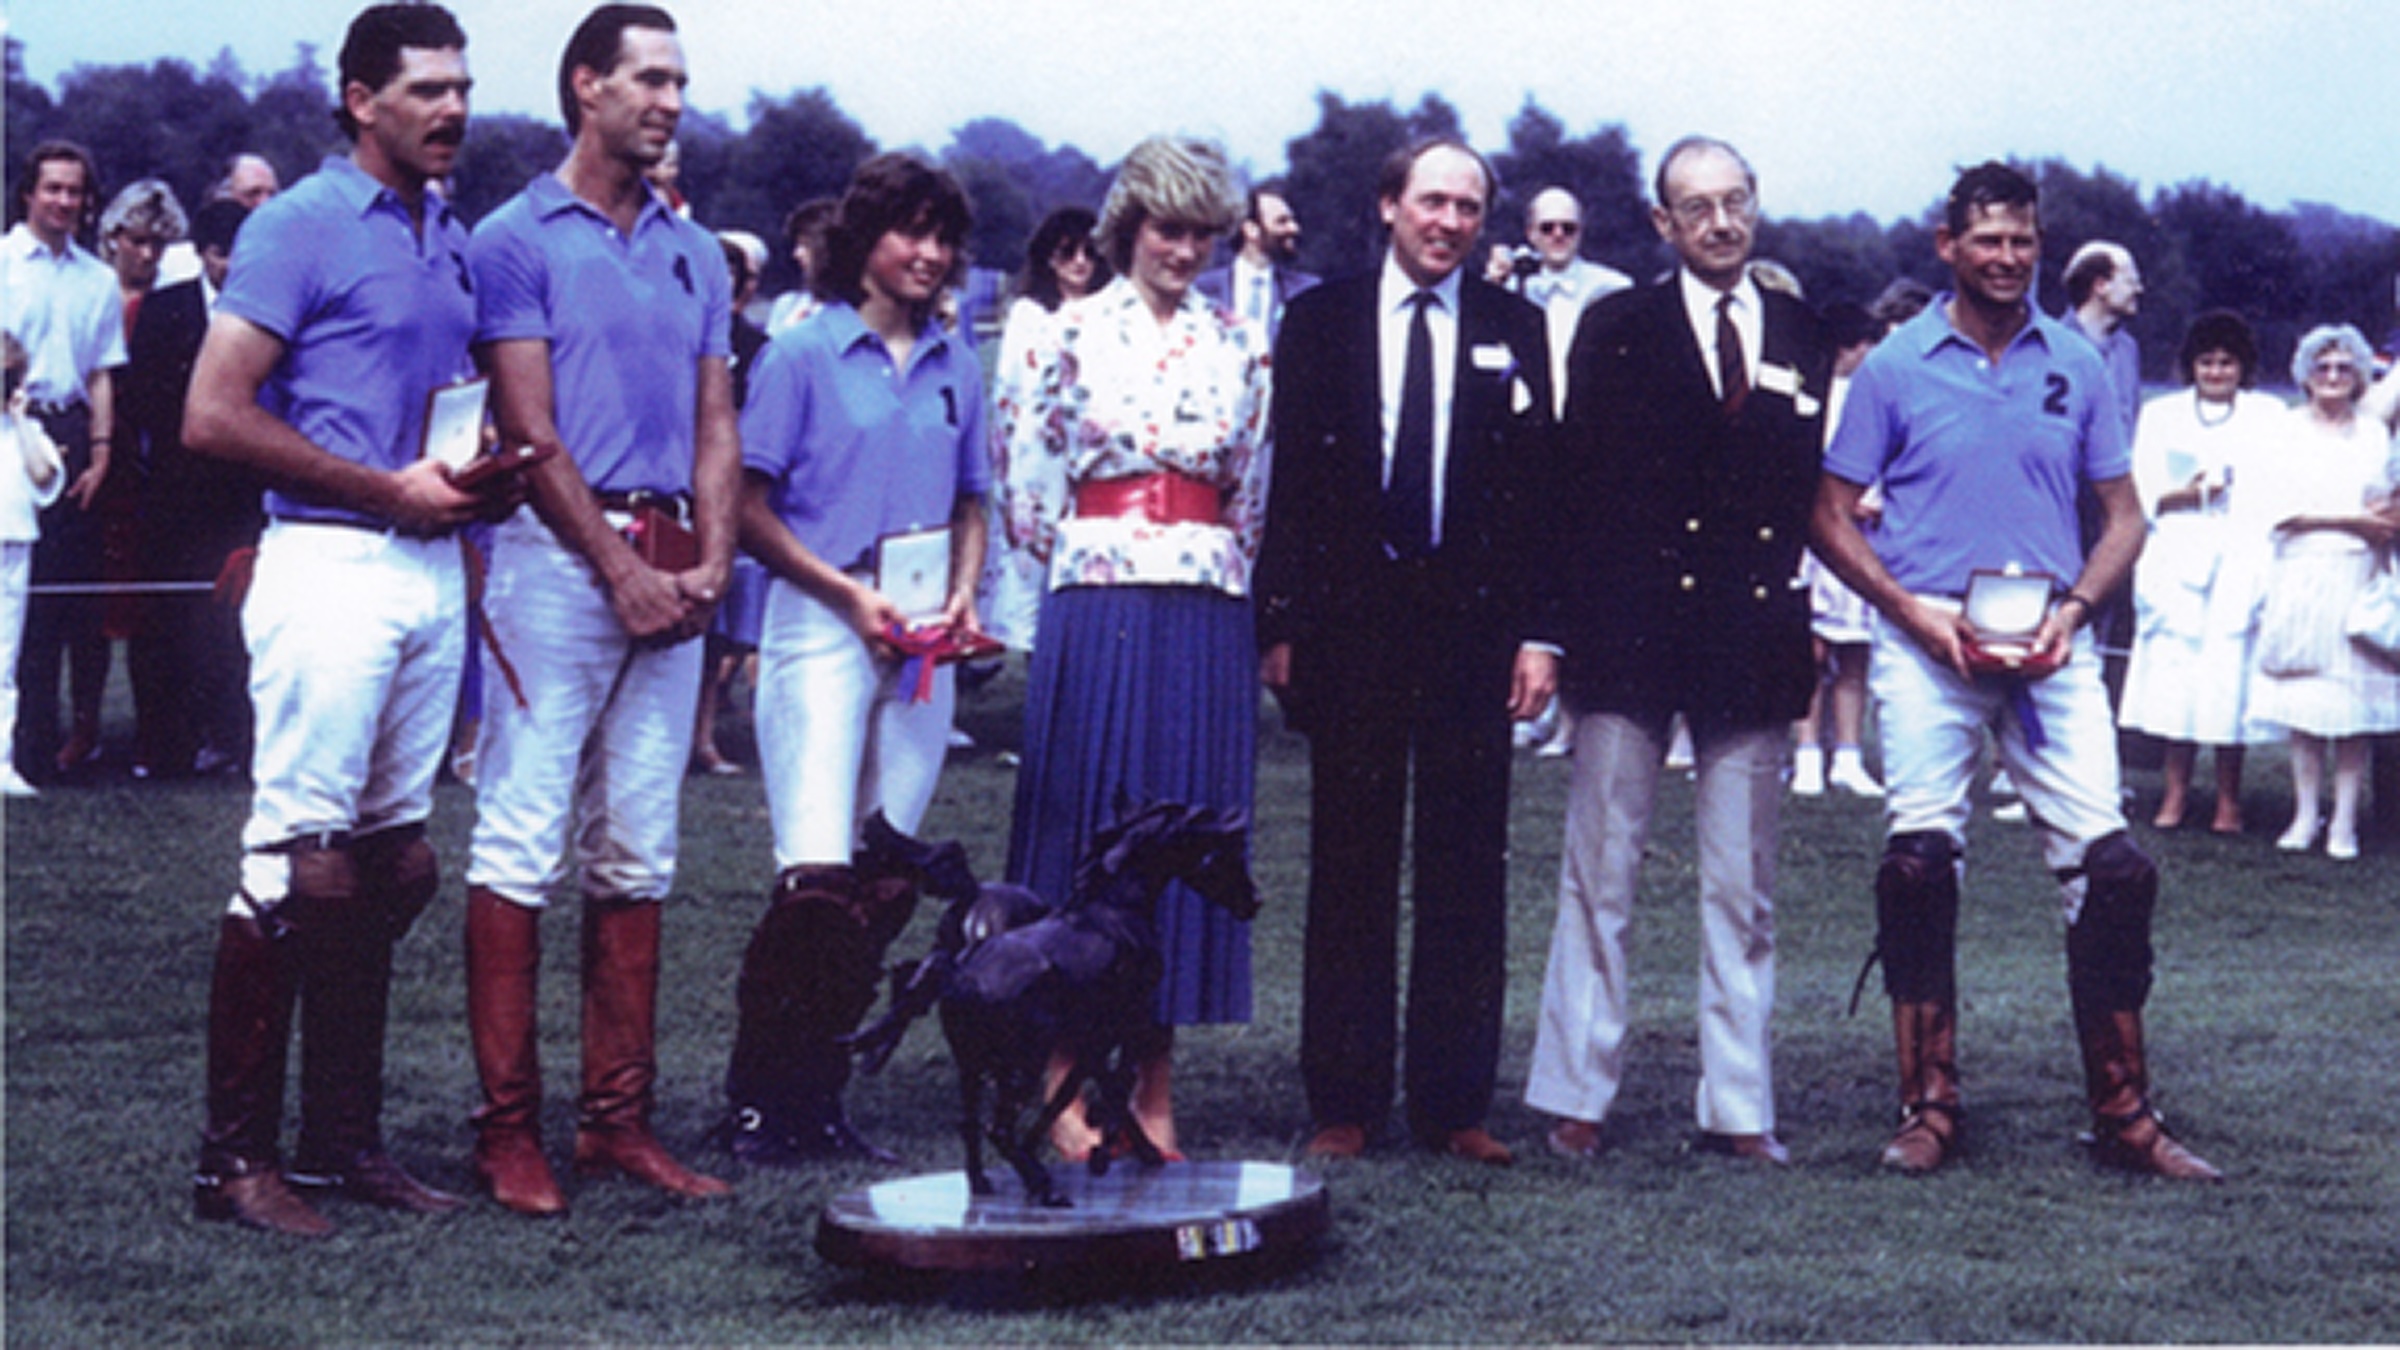 Victoria and her father Peter Grace OBE, being awarded the Dorchester Trophy at Guards Polo Club by Princess Diana having played against HRH Prince of Wales